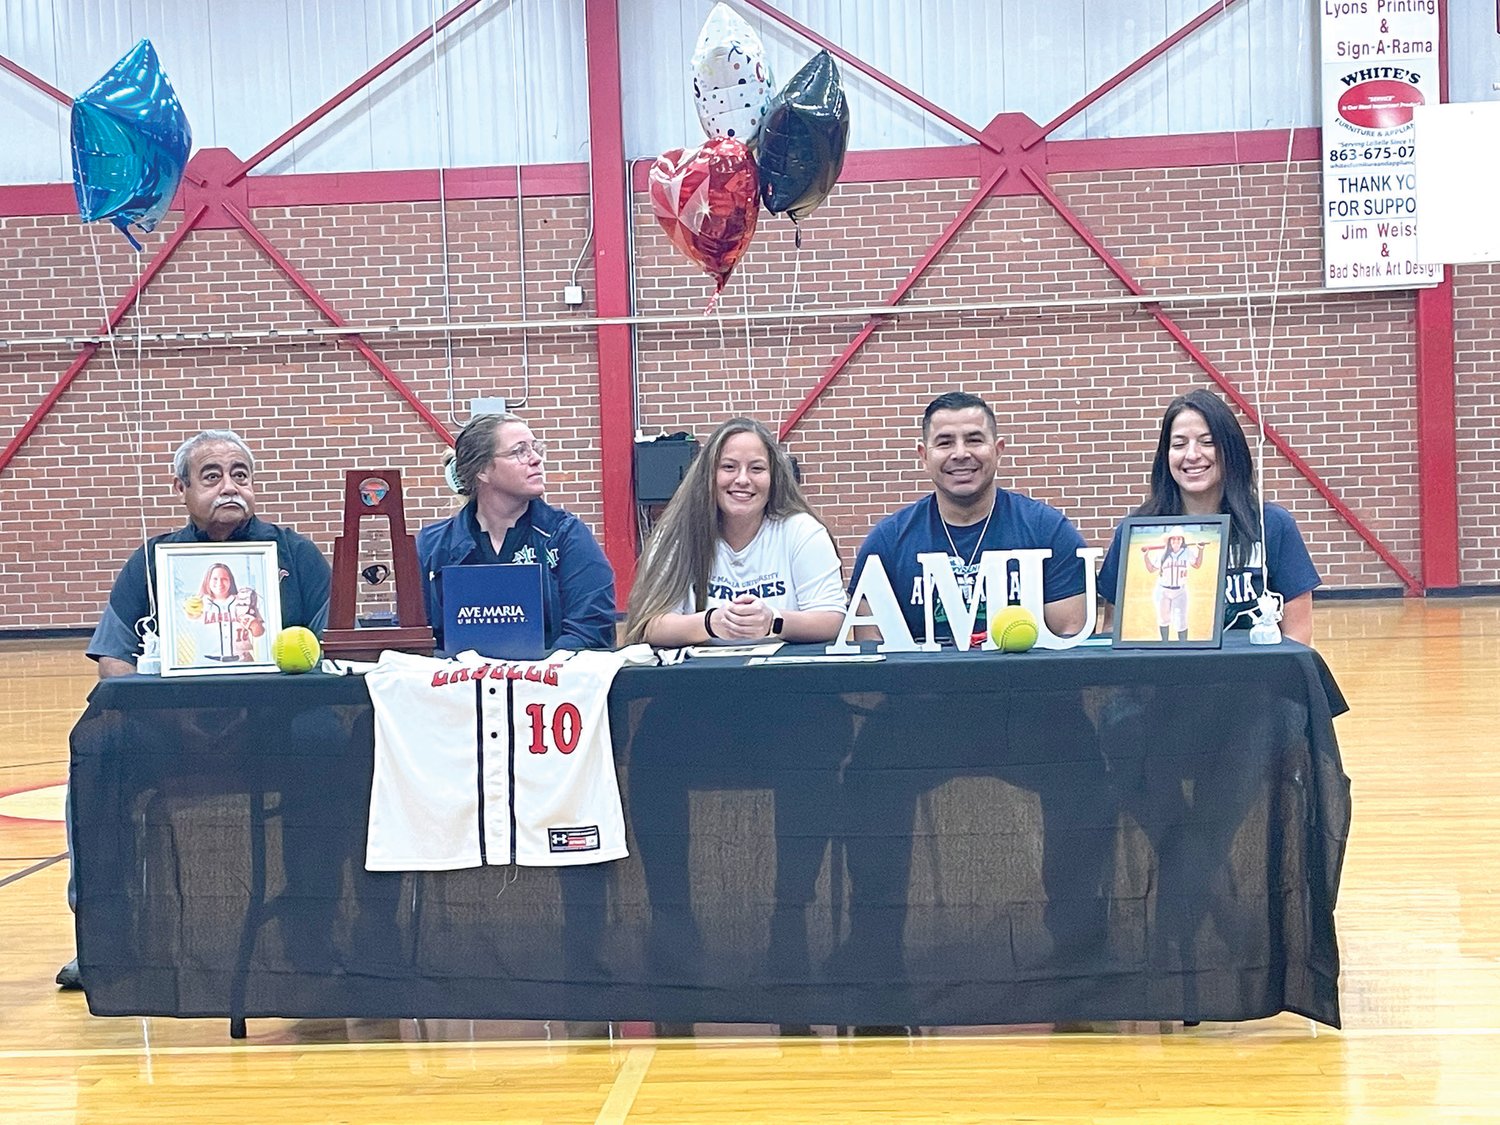 Senior Haleigh Campbell, a member of the varsity basketball and softball teams at LHS, signed her letter of intent to play for Ave Maria University (AMU) in Ave Maria, Florida and will play softball for the Gyrenes.